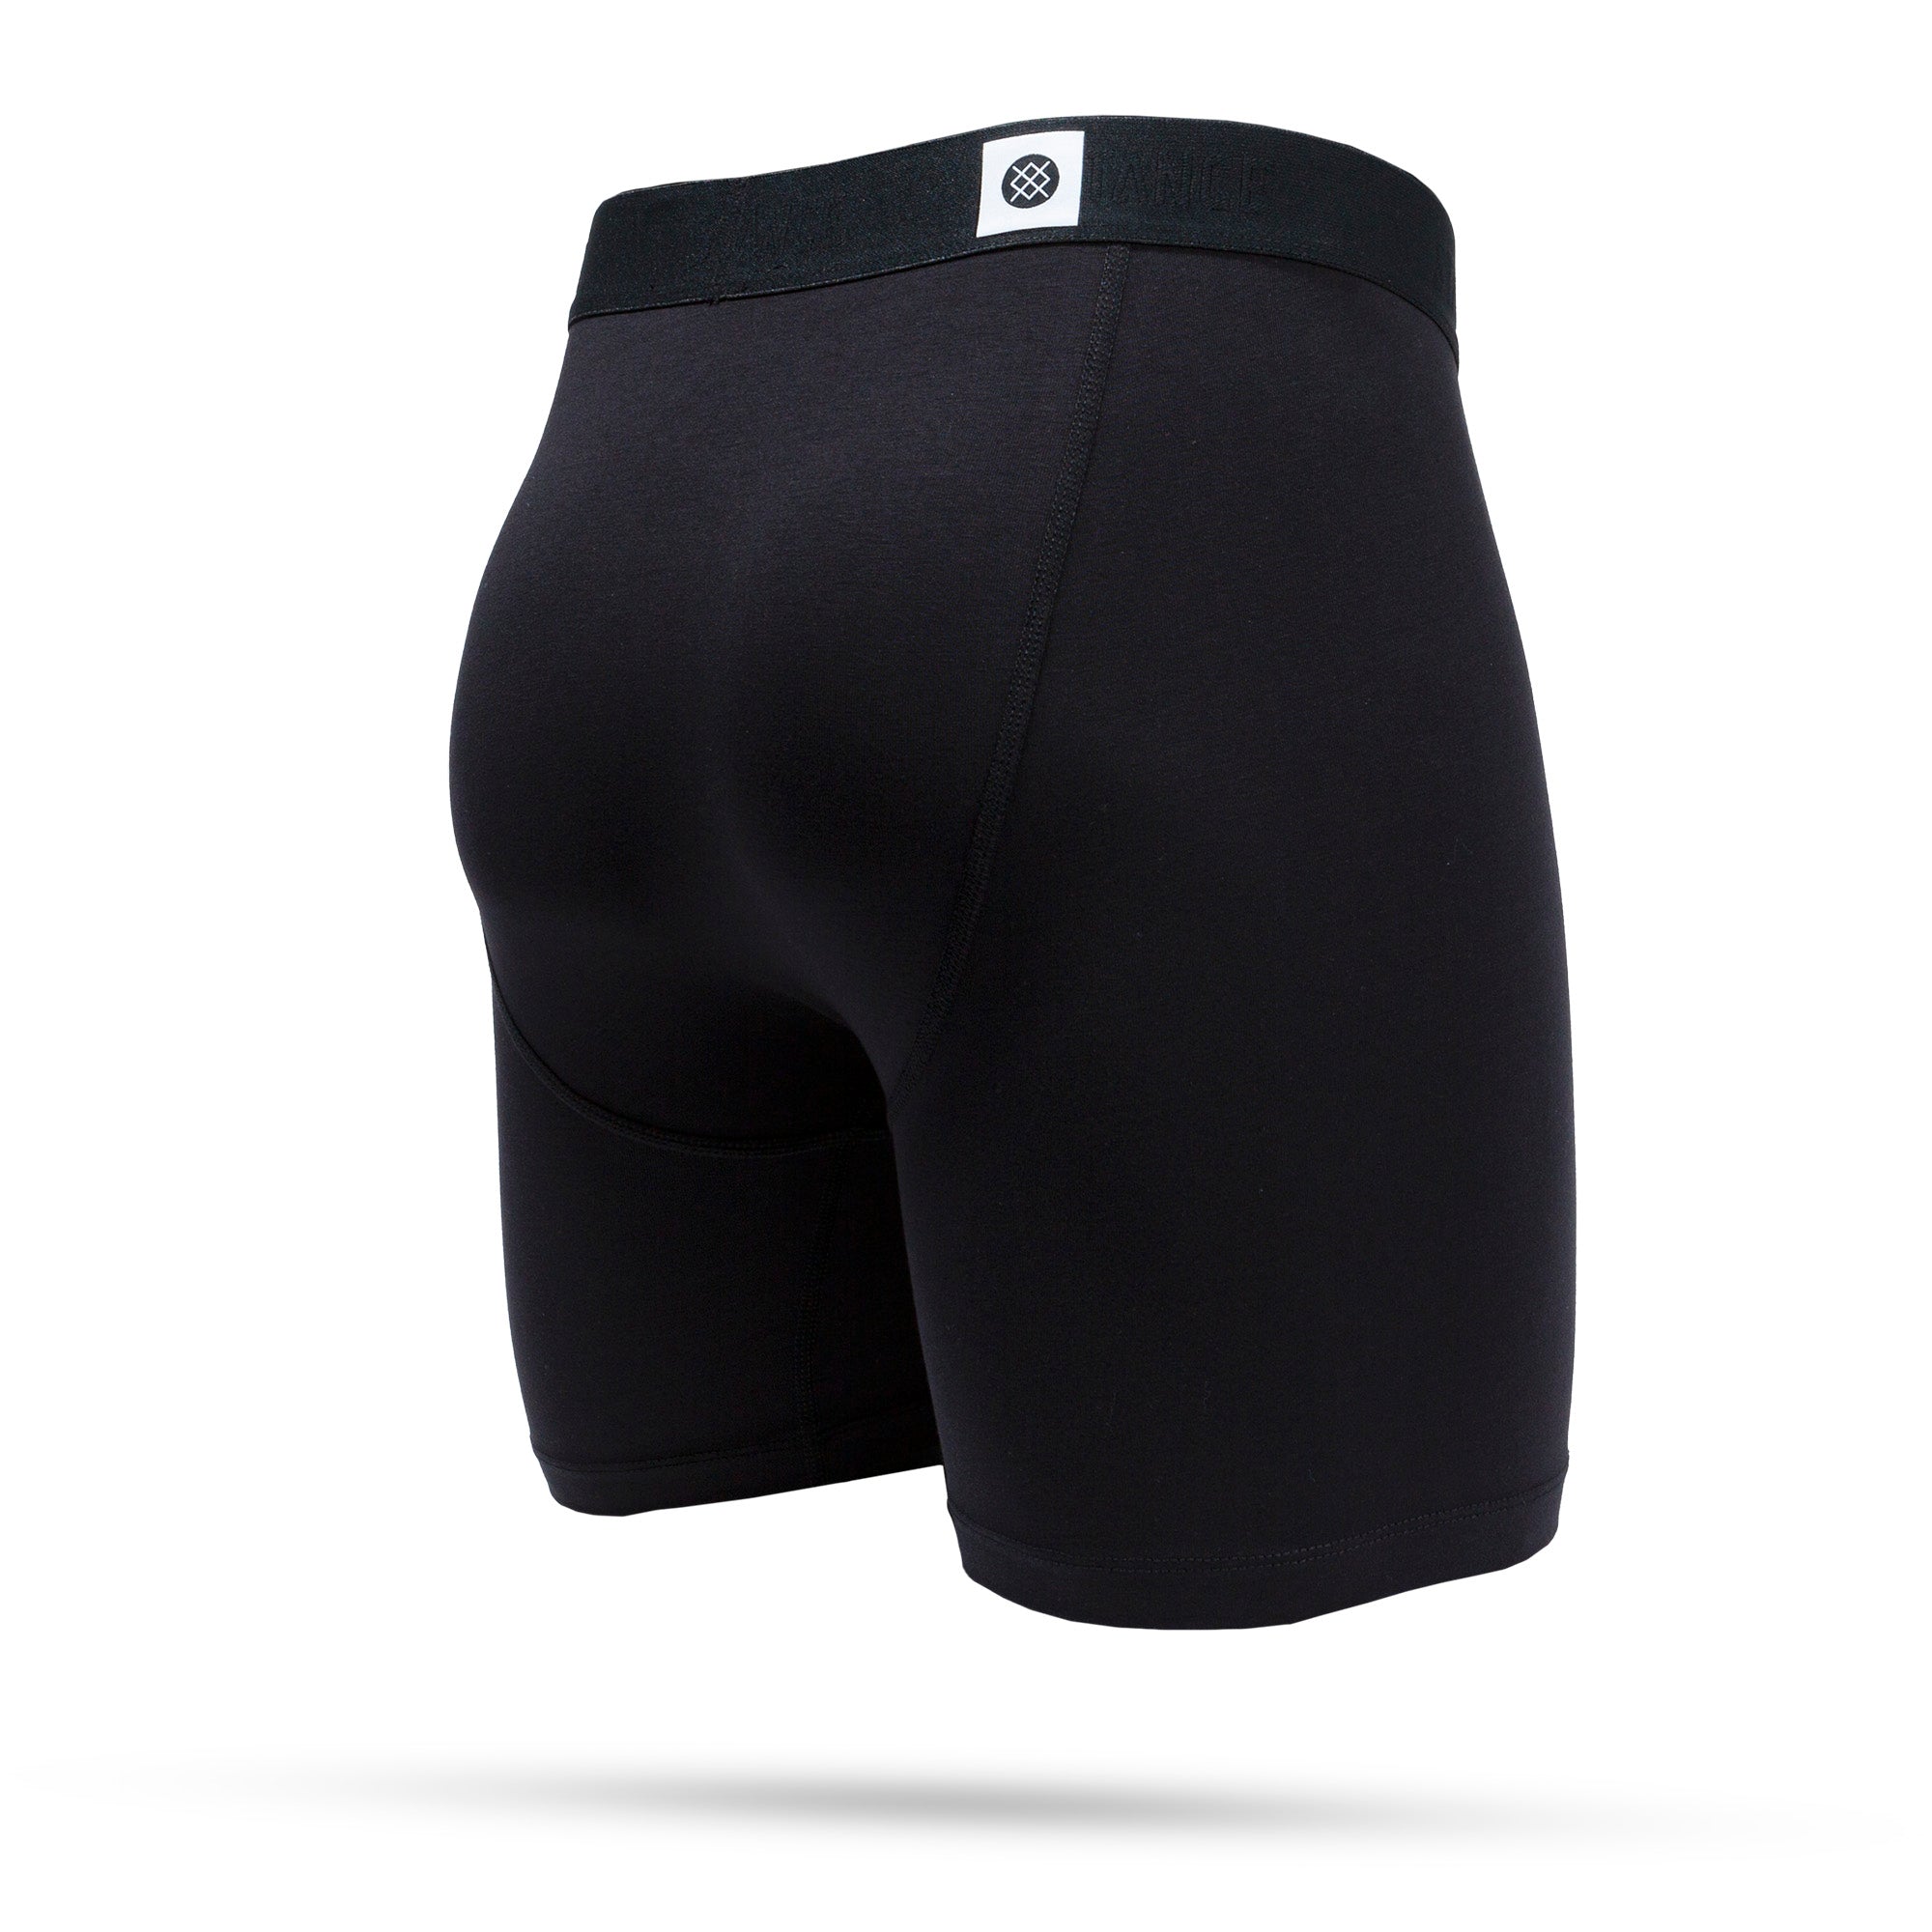 Stance Underwear: Sale, Clearance & Outlet